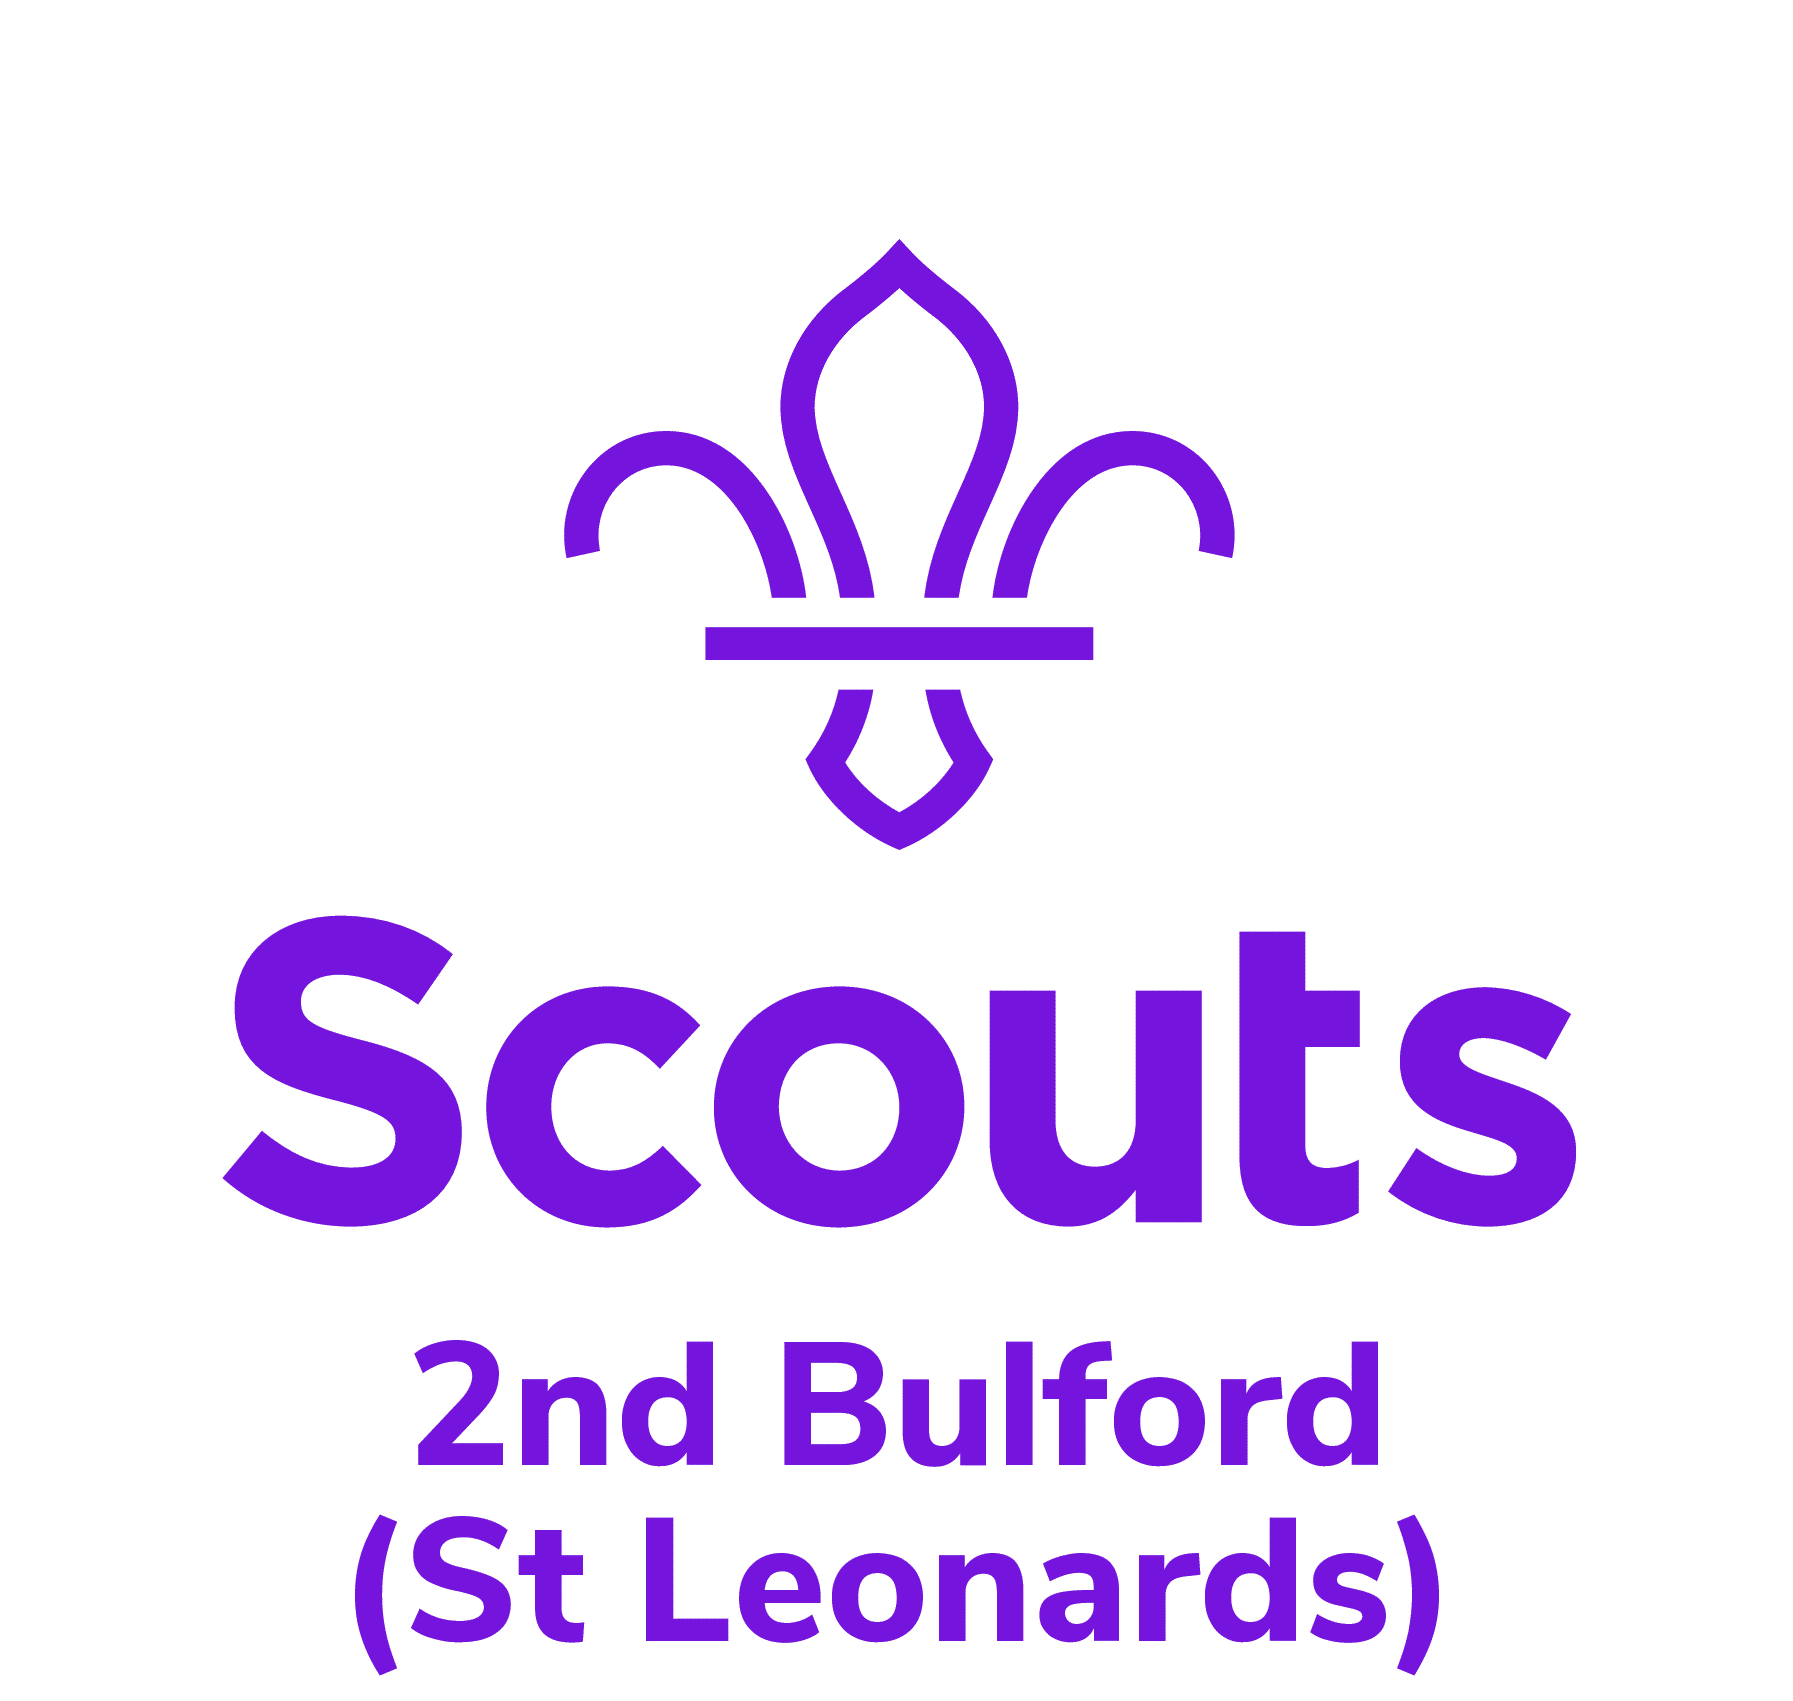 Scouts 2nd Bulford (St Leonards)